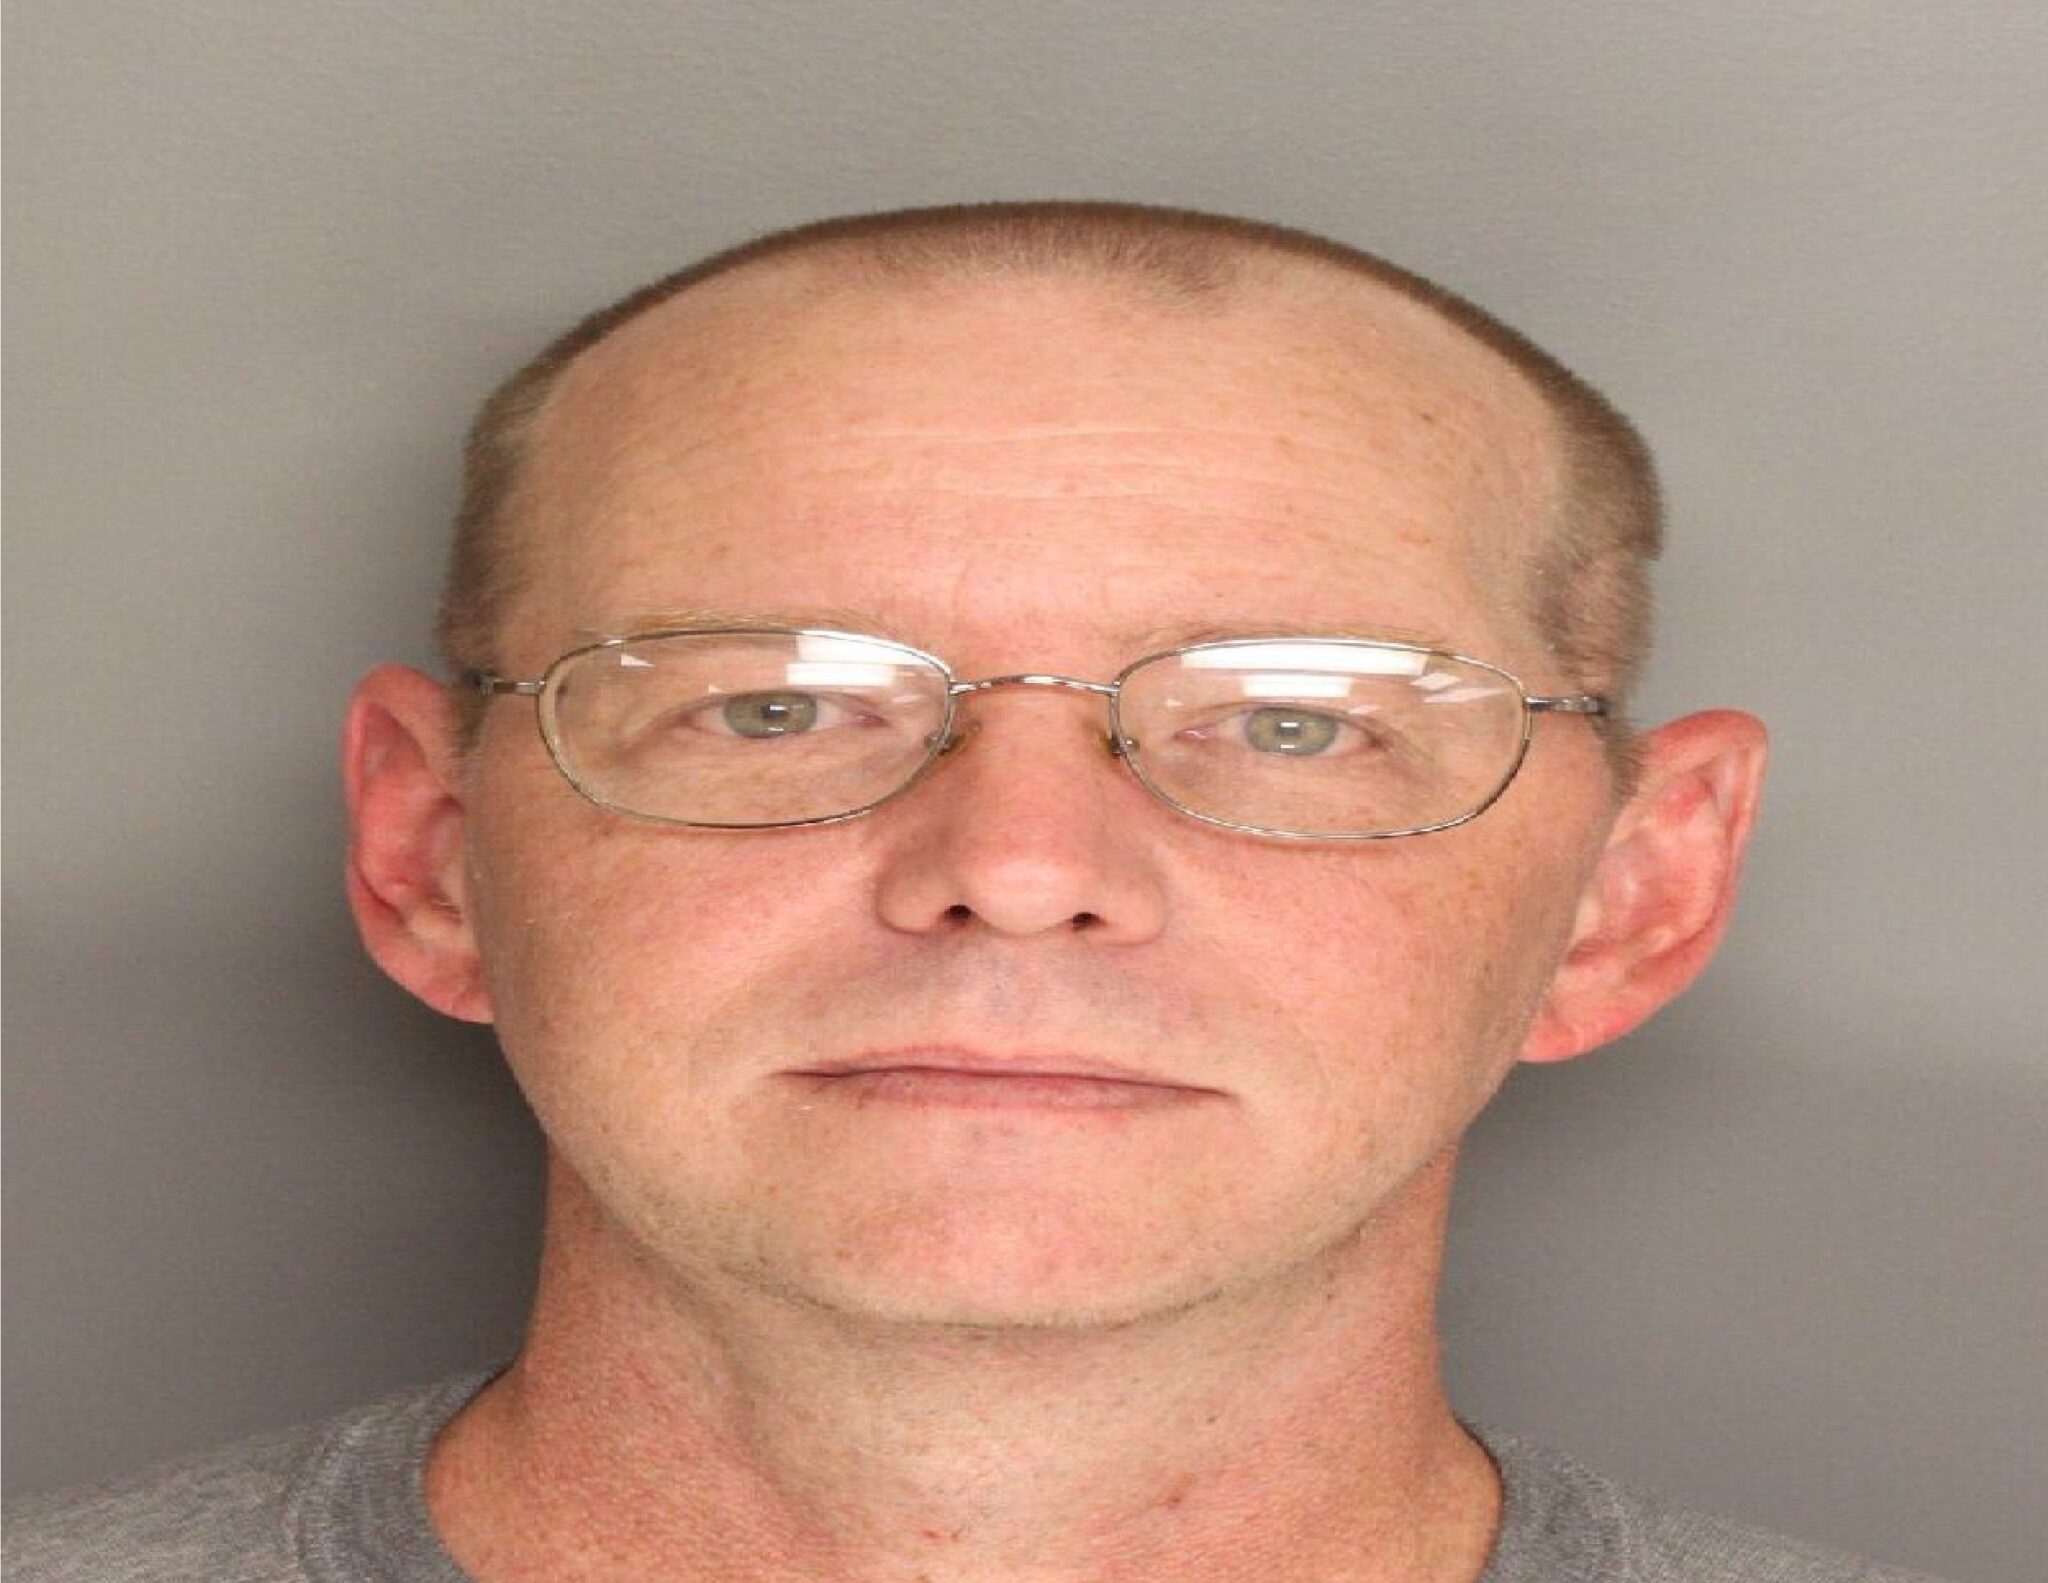 Pictured: James Baxley (Via Berkeley County Sheriff's Office)